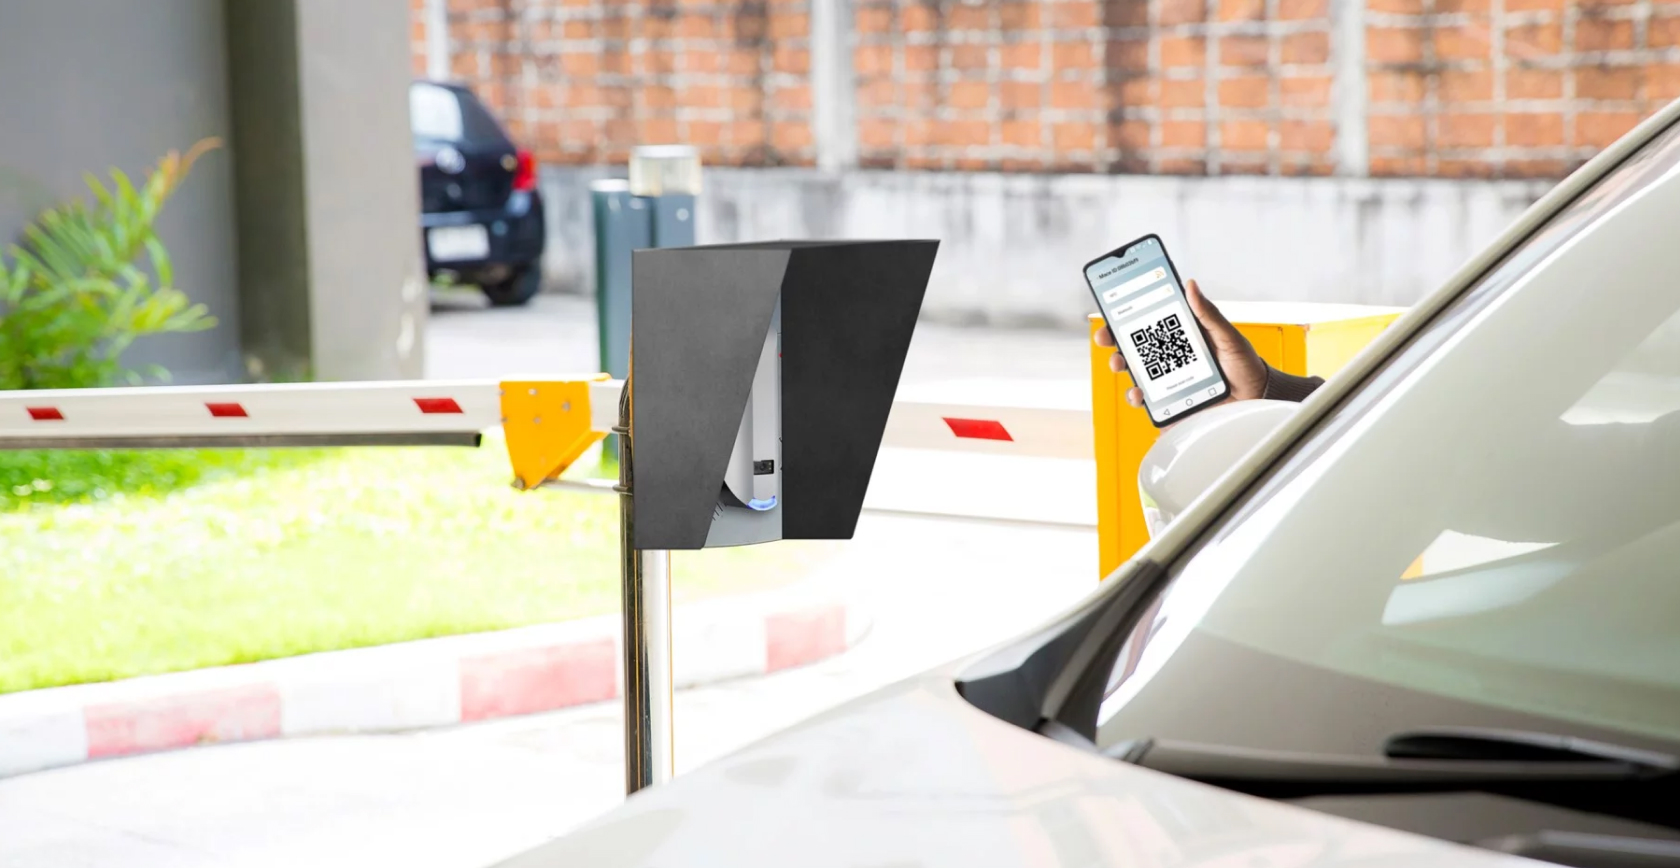 RFID vehicle access control explained - Nedap Identification Systems